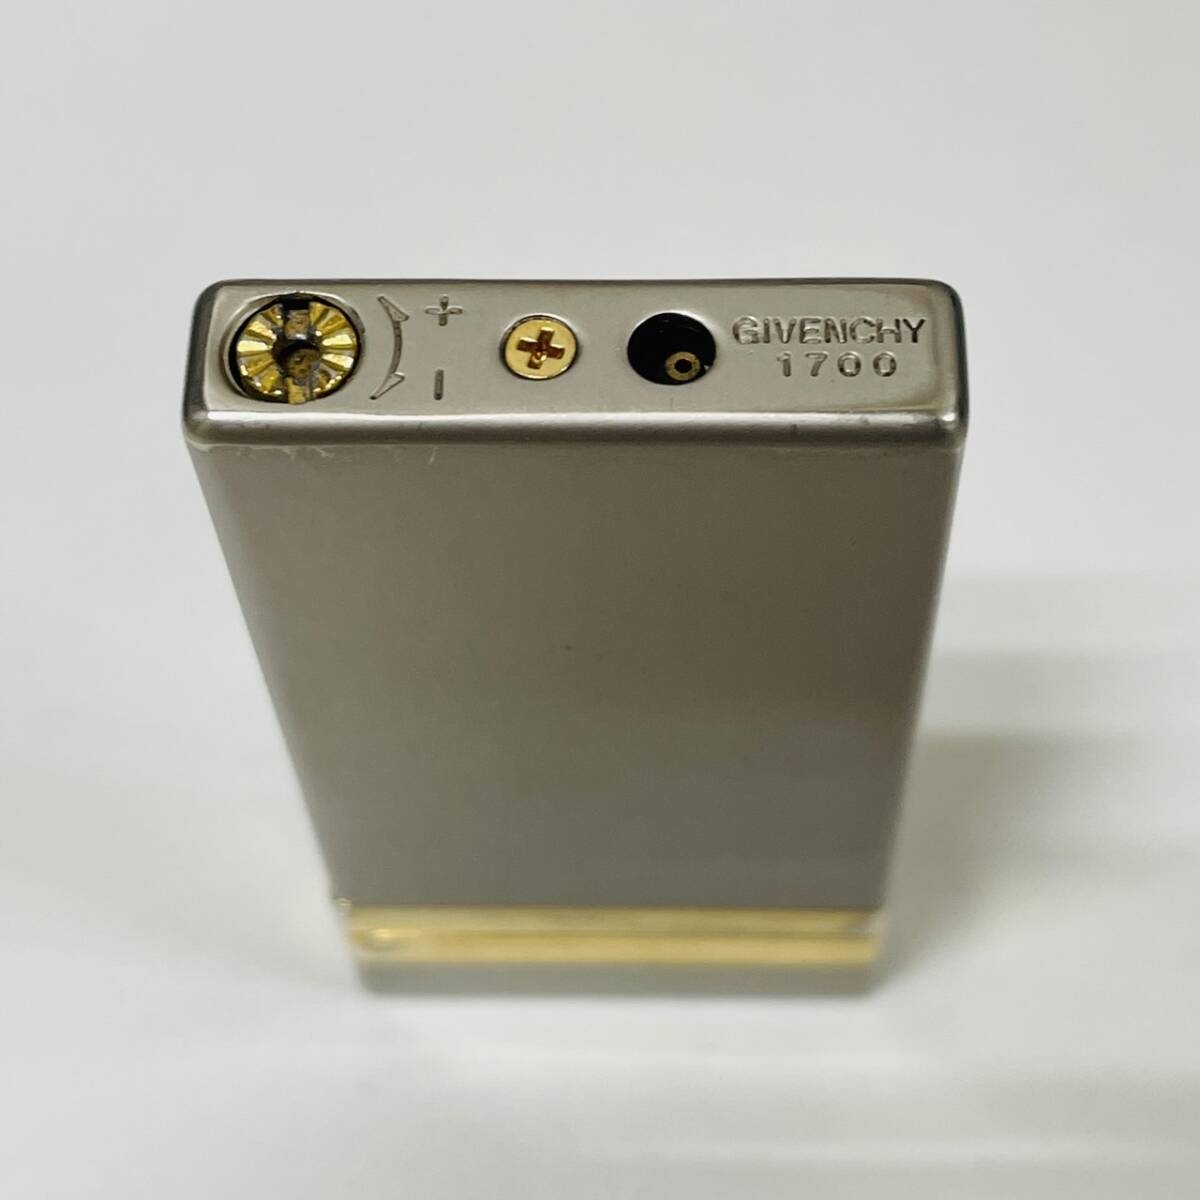 [MIA-11117YN]1 jpy ~ GIVENCHY Givenchy gas lighter 1700 silver × Gold put on fire not yet verification smoking . brand lighter box attaching long-term keeping goods 